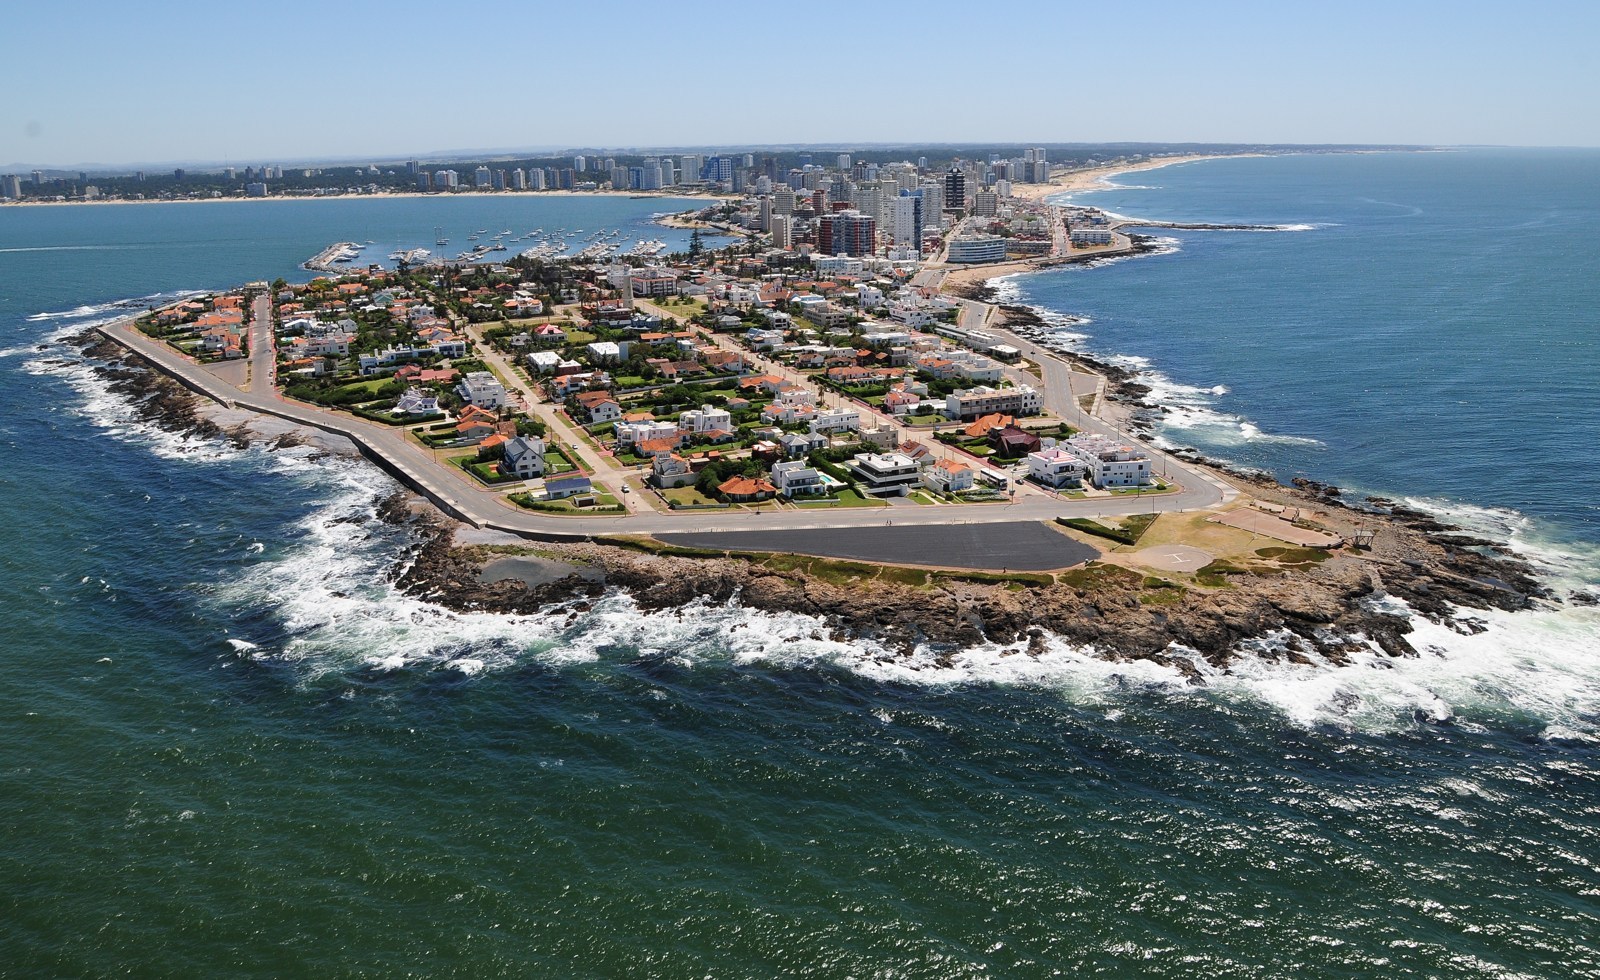 Tourism is one of Uruguay's primary sources of income. Punta del Este, in the picture, is one of the main destinations in Uruguay.